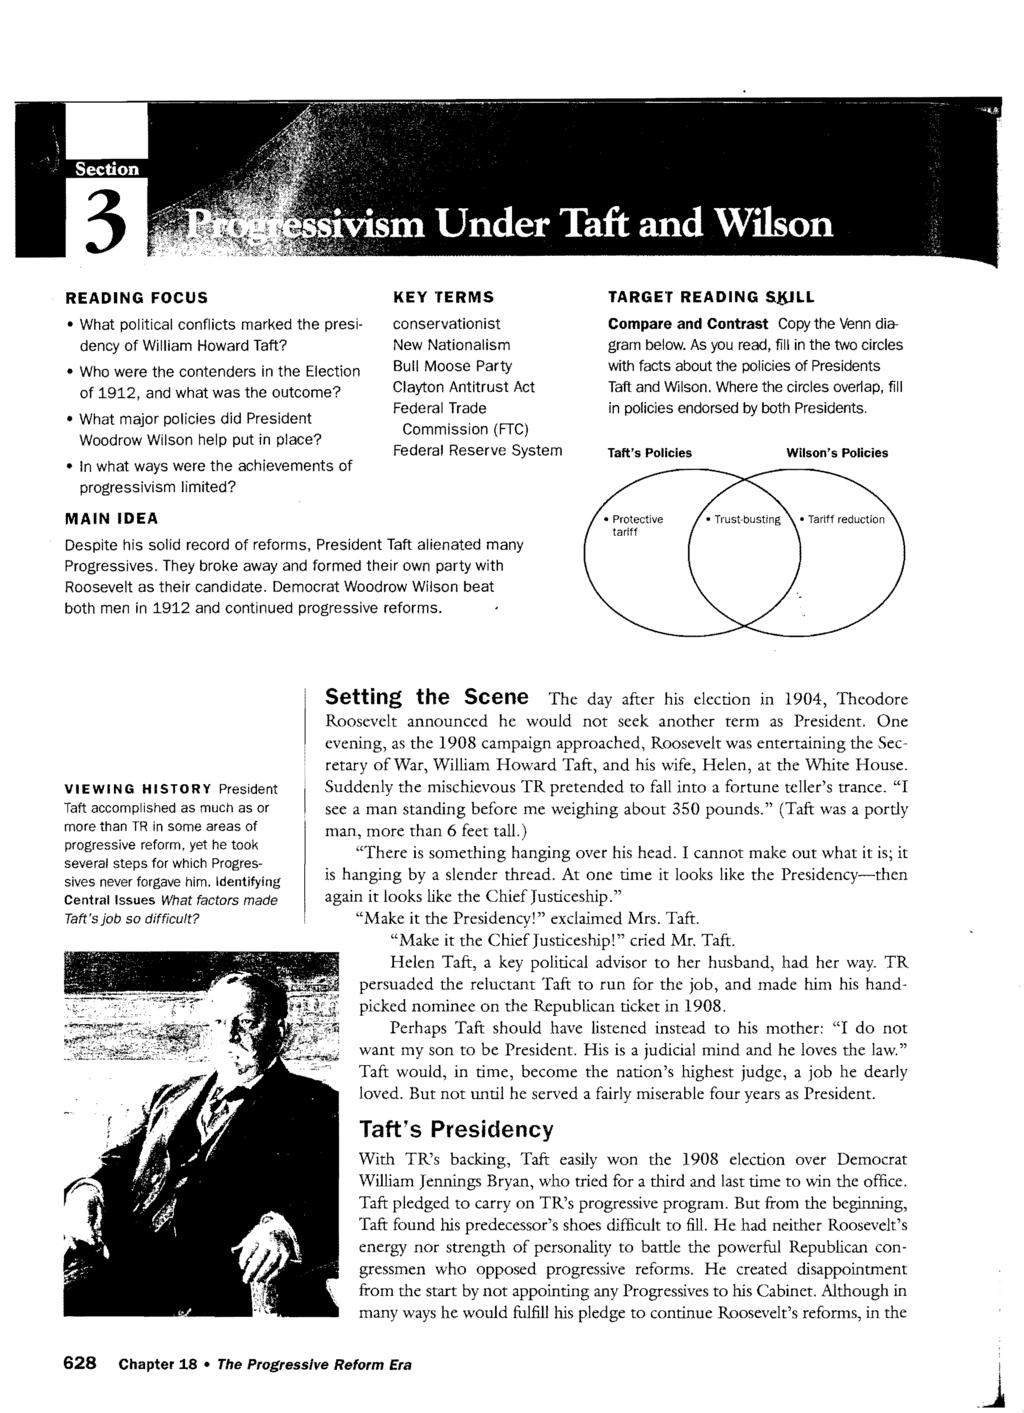 READING FOCUS KEY'rERMS TARGE-r READING S.HJLL What political conflicts marked the presi conservationist Compare and Contrast Copy the Venn diadency of William Howard Taft? New Nationalism gram below.